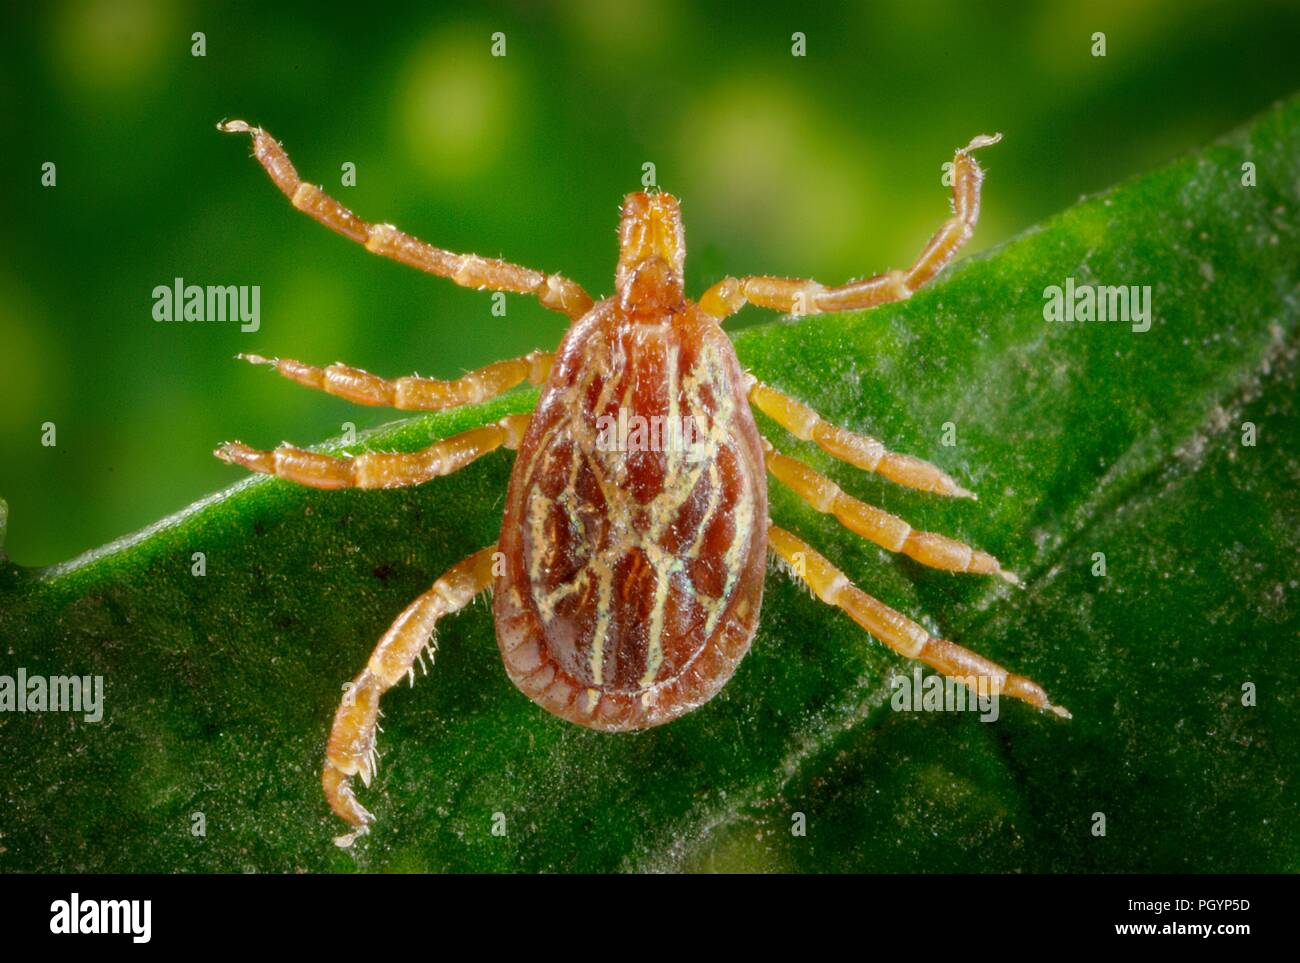 Photograph showing the dorsal view of a brown and cream colored male Gulf Coast tick (Amblyomma maculatum) a vector for several types of Ricketts diseases, and heartwater disease, balancing on the green blade of a plant, image courtesy CDC/Dr Christopher Paddock, 2008. () Stock Photo